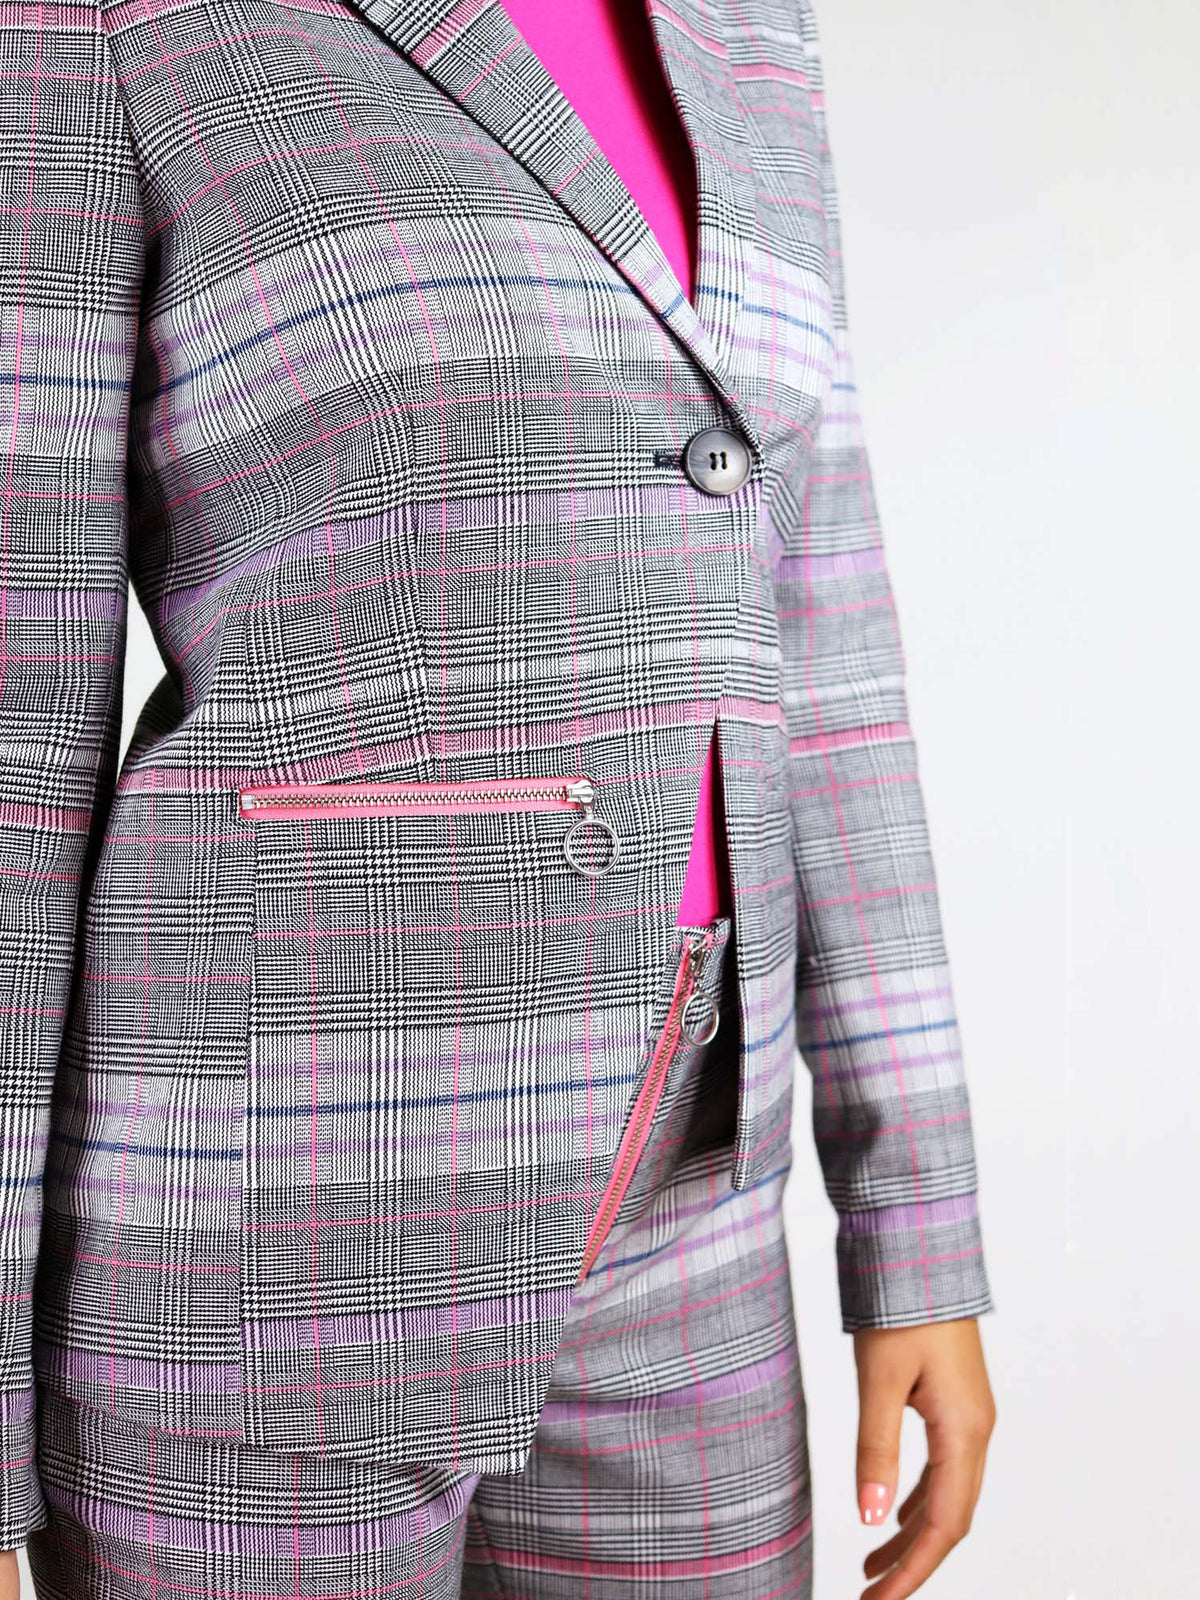 The revivify pink and grey blazer has asymmetric shape design and bxy fit. It also has a pocket with pink metal zip with ring puller on one of the sides. 